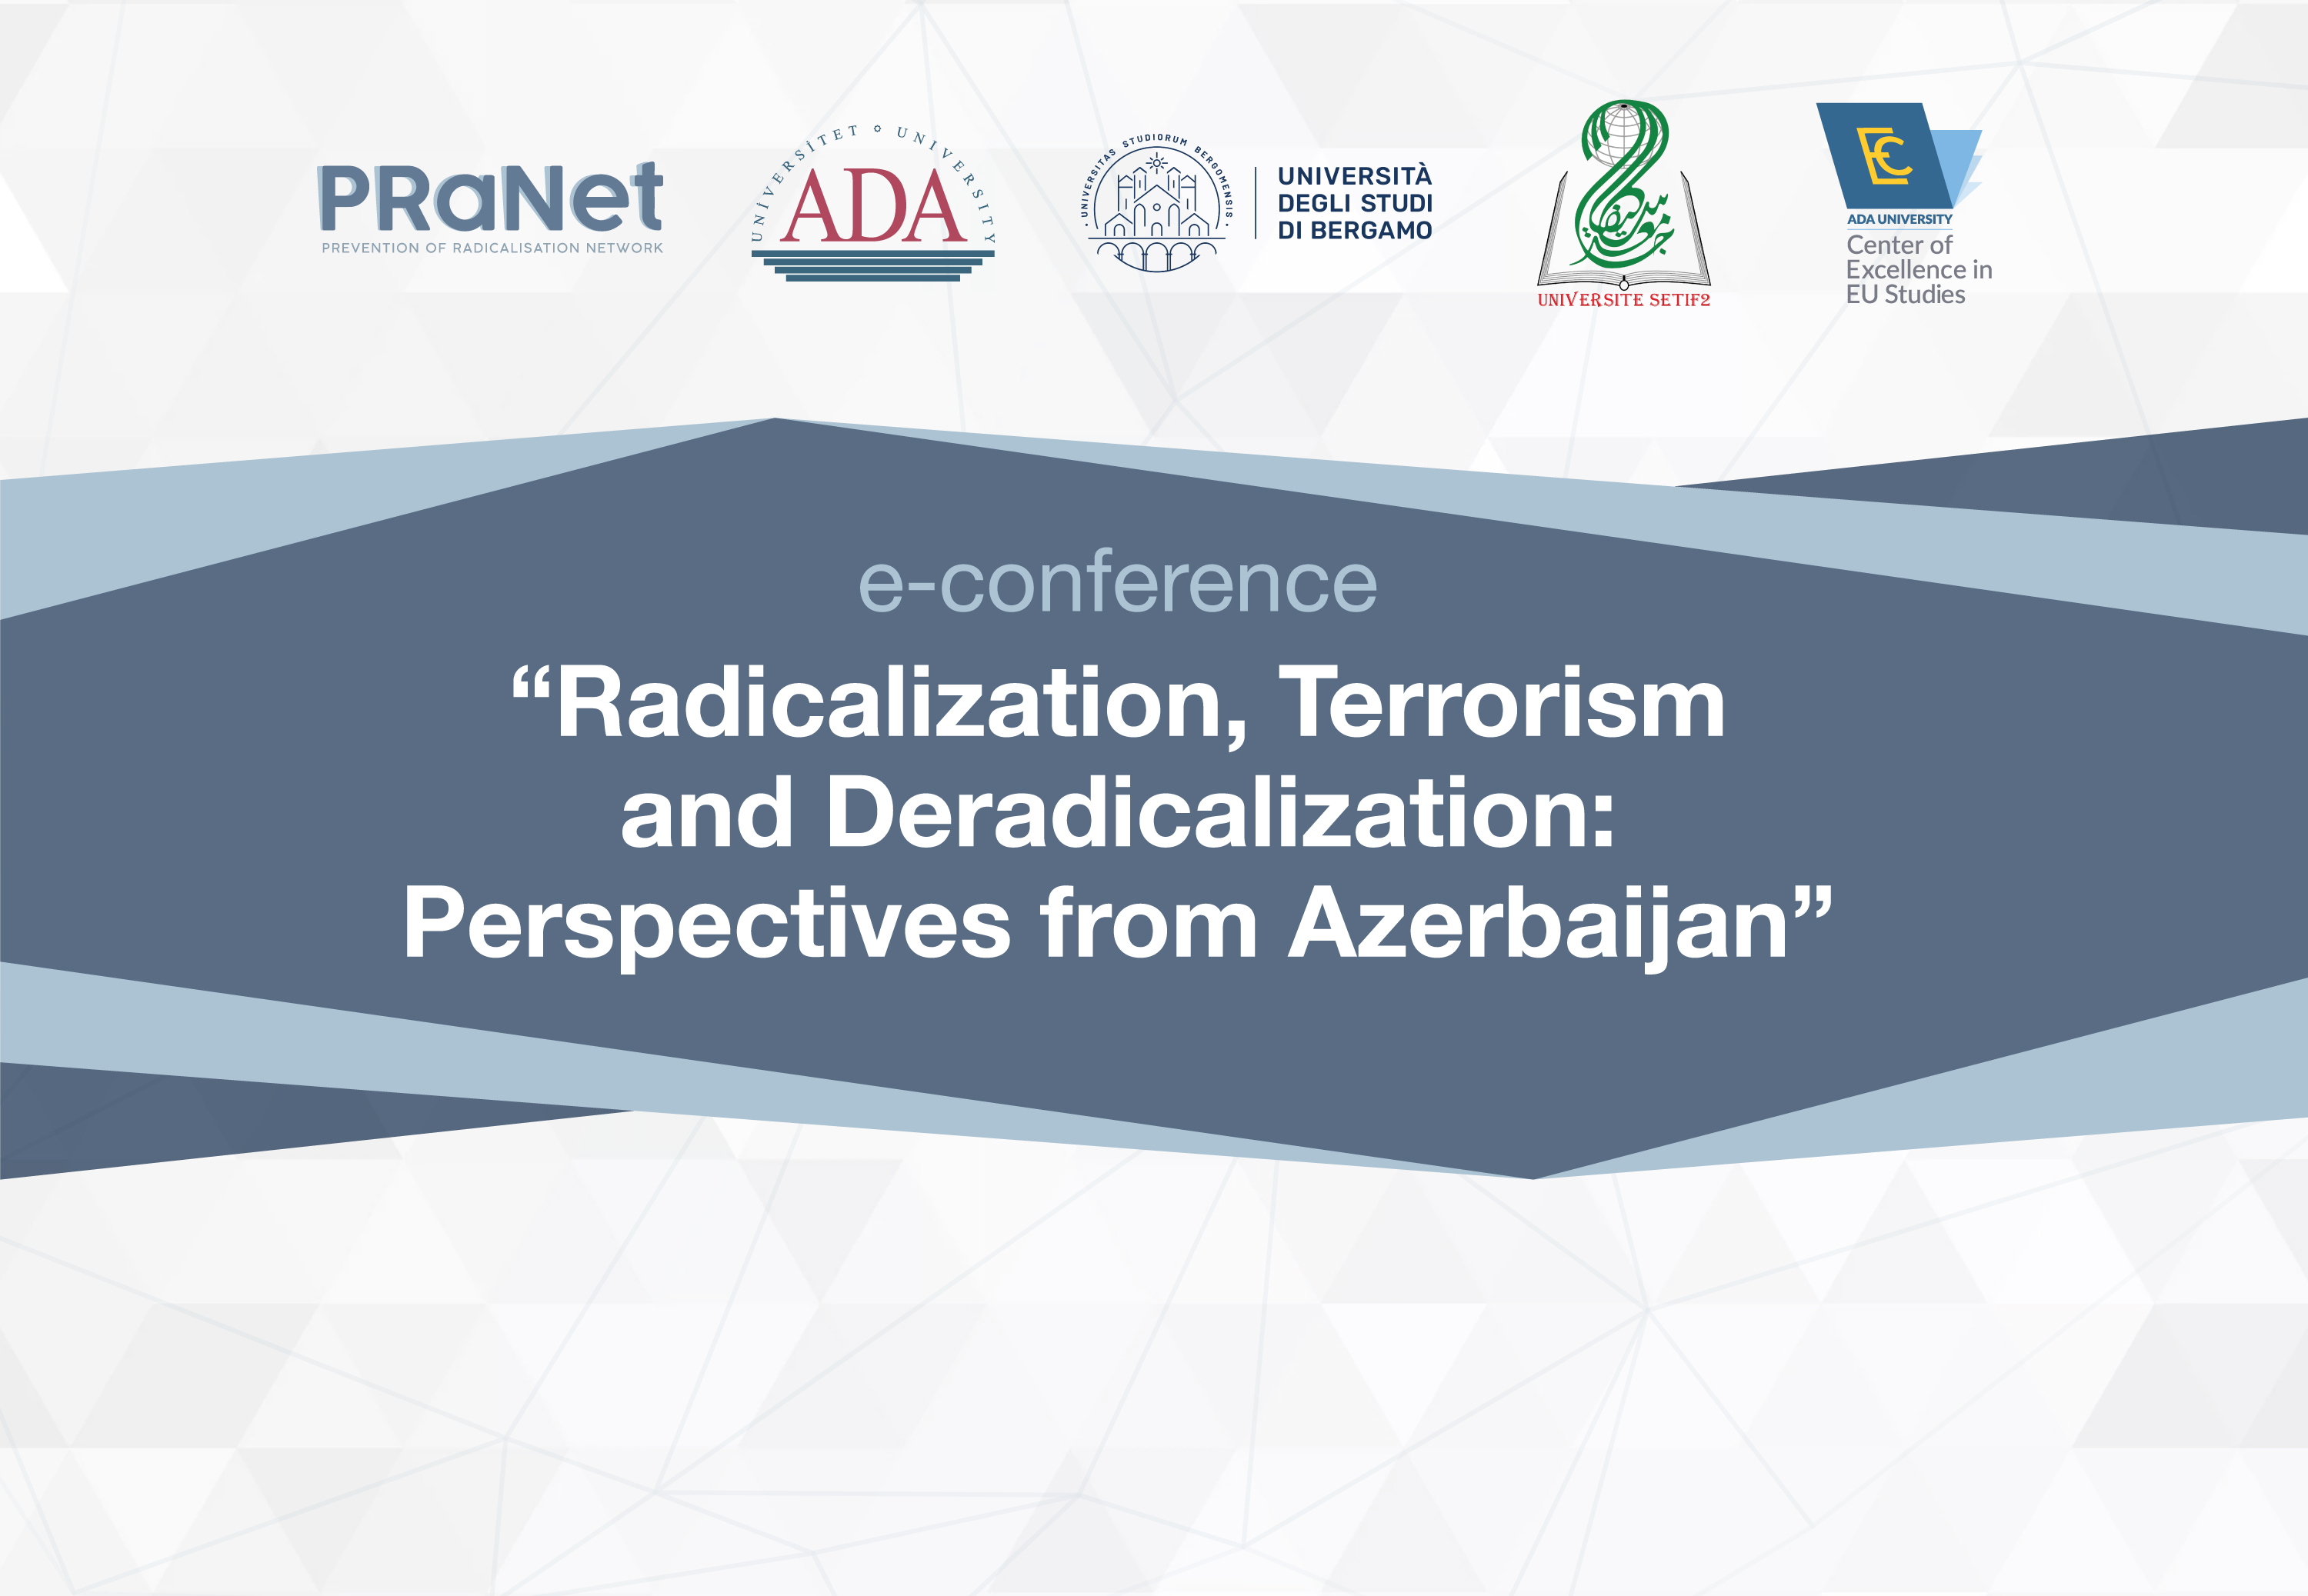 E-Conference on Radicalization, Terrorism and Radicalization: Perspective from Azerbaijan within PRaNet project